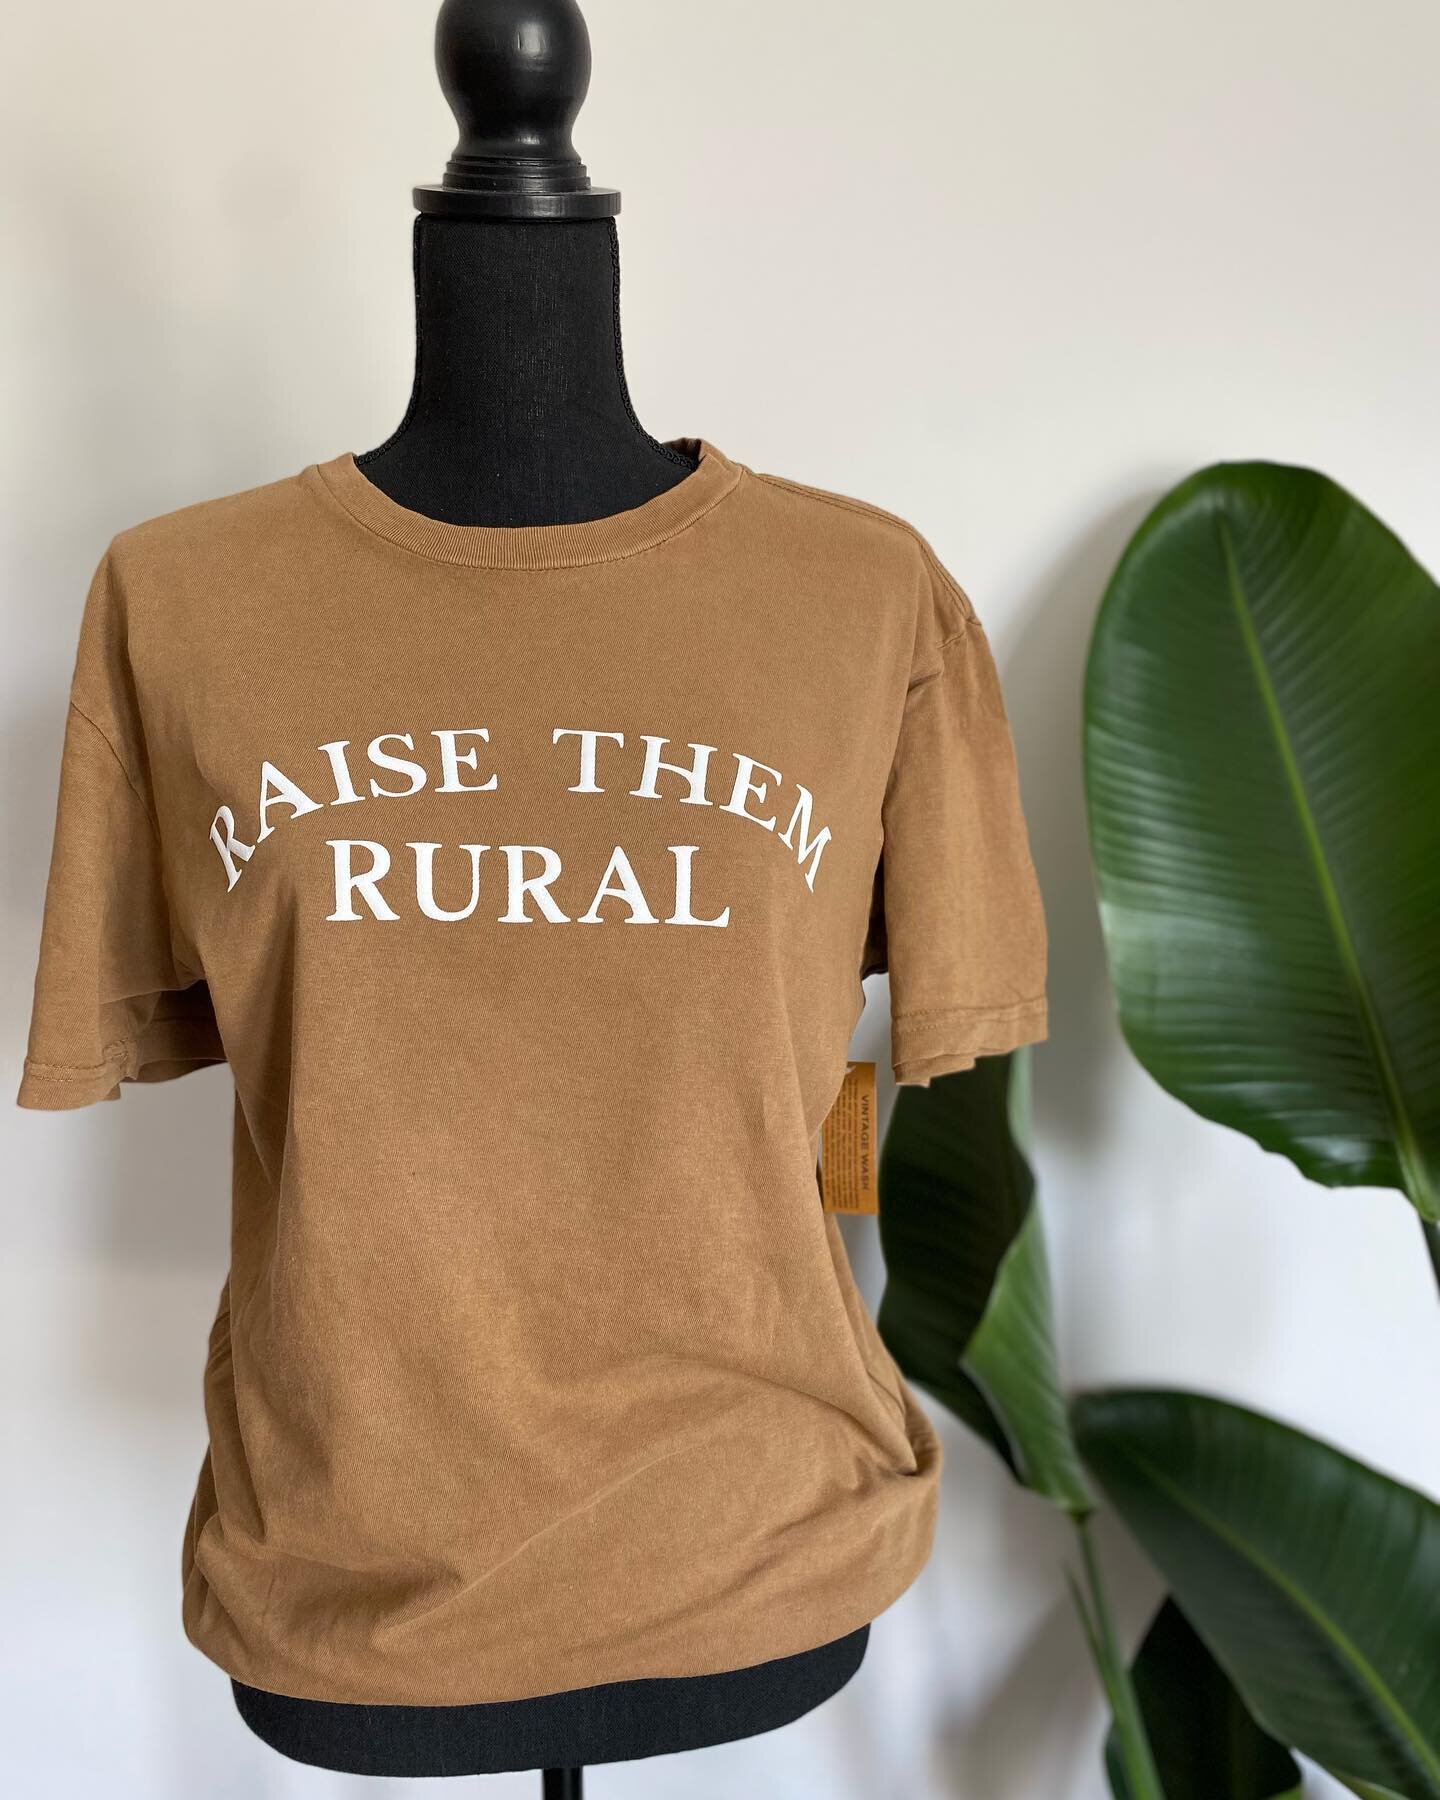 Raise Them Rural | Vintage Tee

Who else is trying to raise their babies rural? This vintage wash tee comes in black + camel, sizes S-XXXL! Pre-shrunk, unisex fit!

S-XL | $28
XXL-XXXL | $30

Shop link in bio ✨